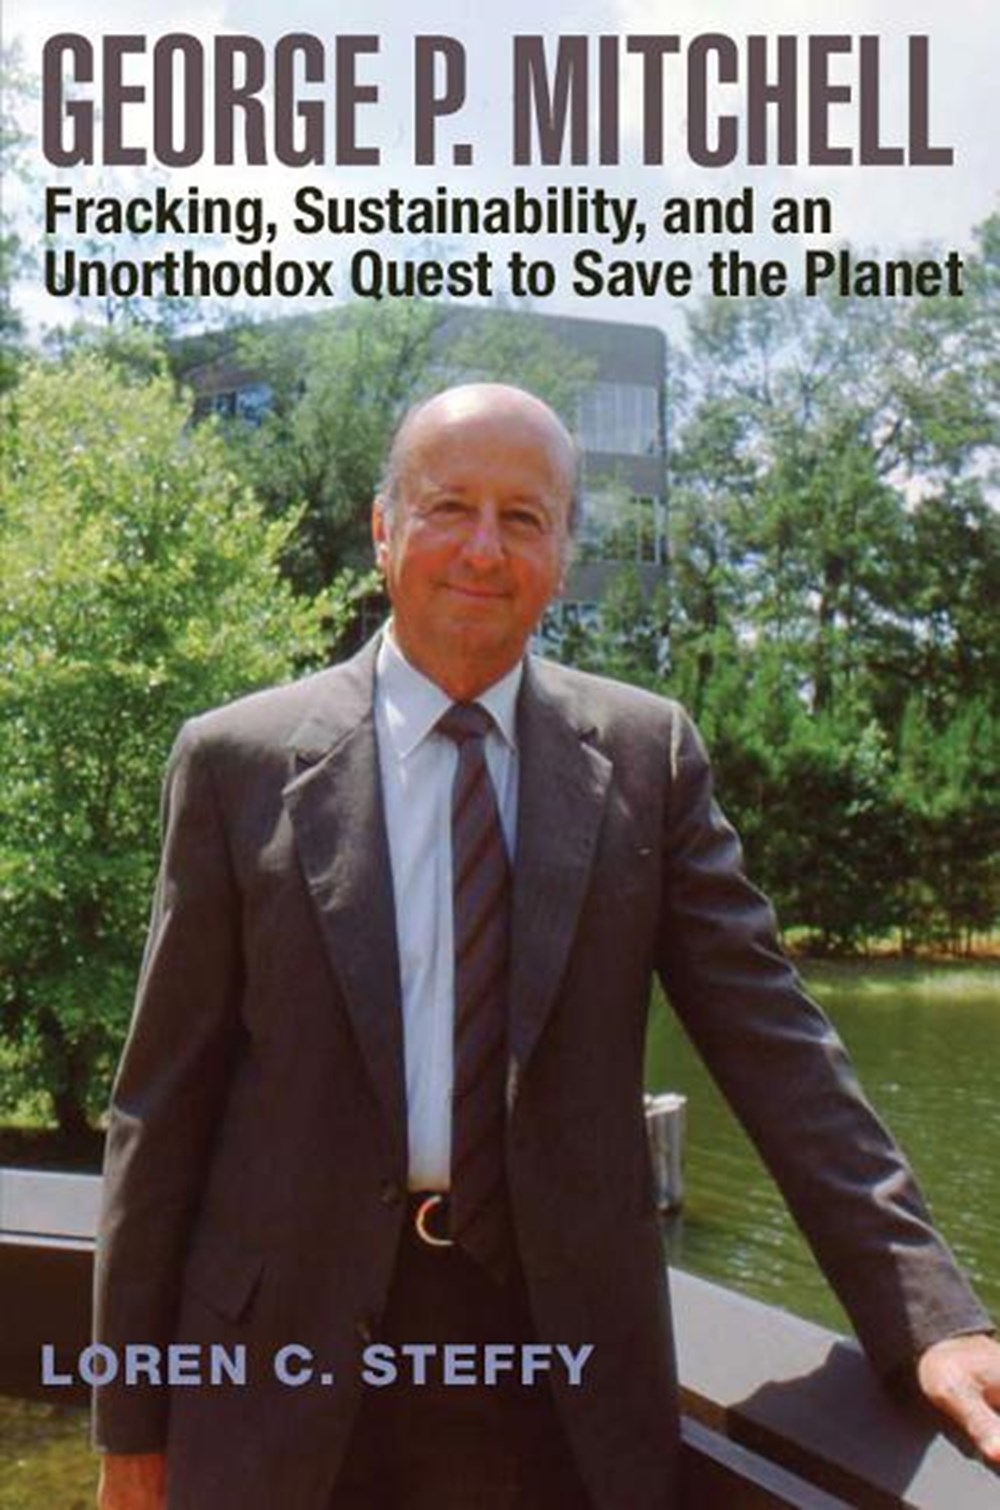 George P. Mitchell Fracking, Sustainability, and an Unorthodox Quest to Save the Planet